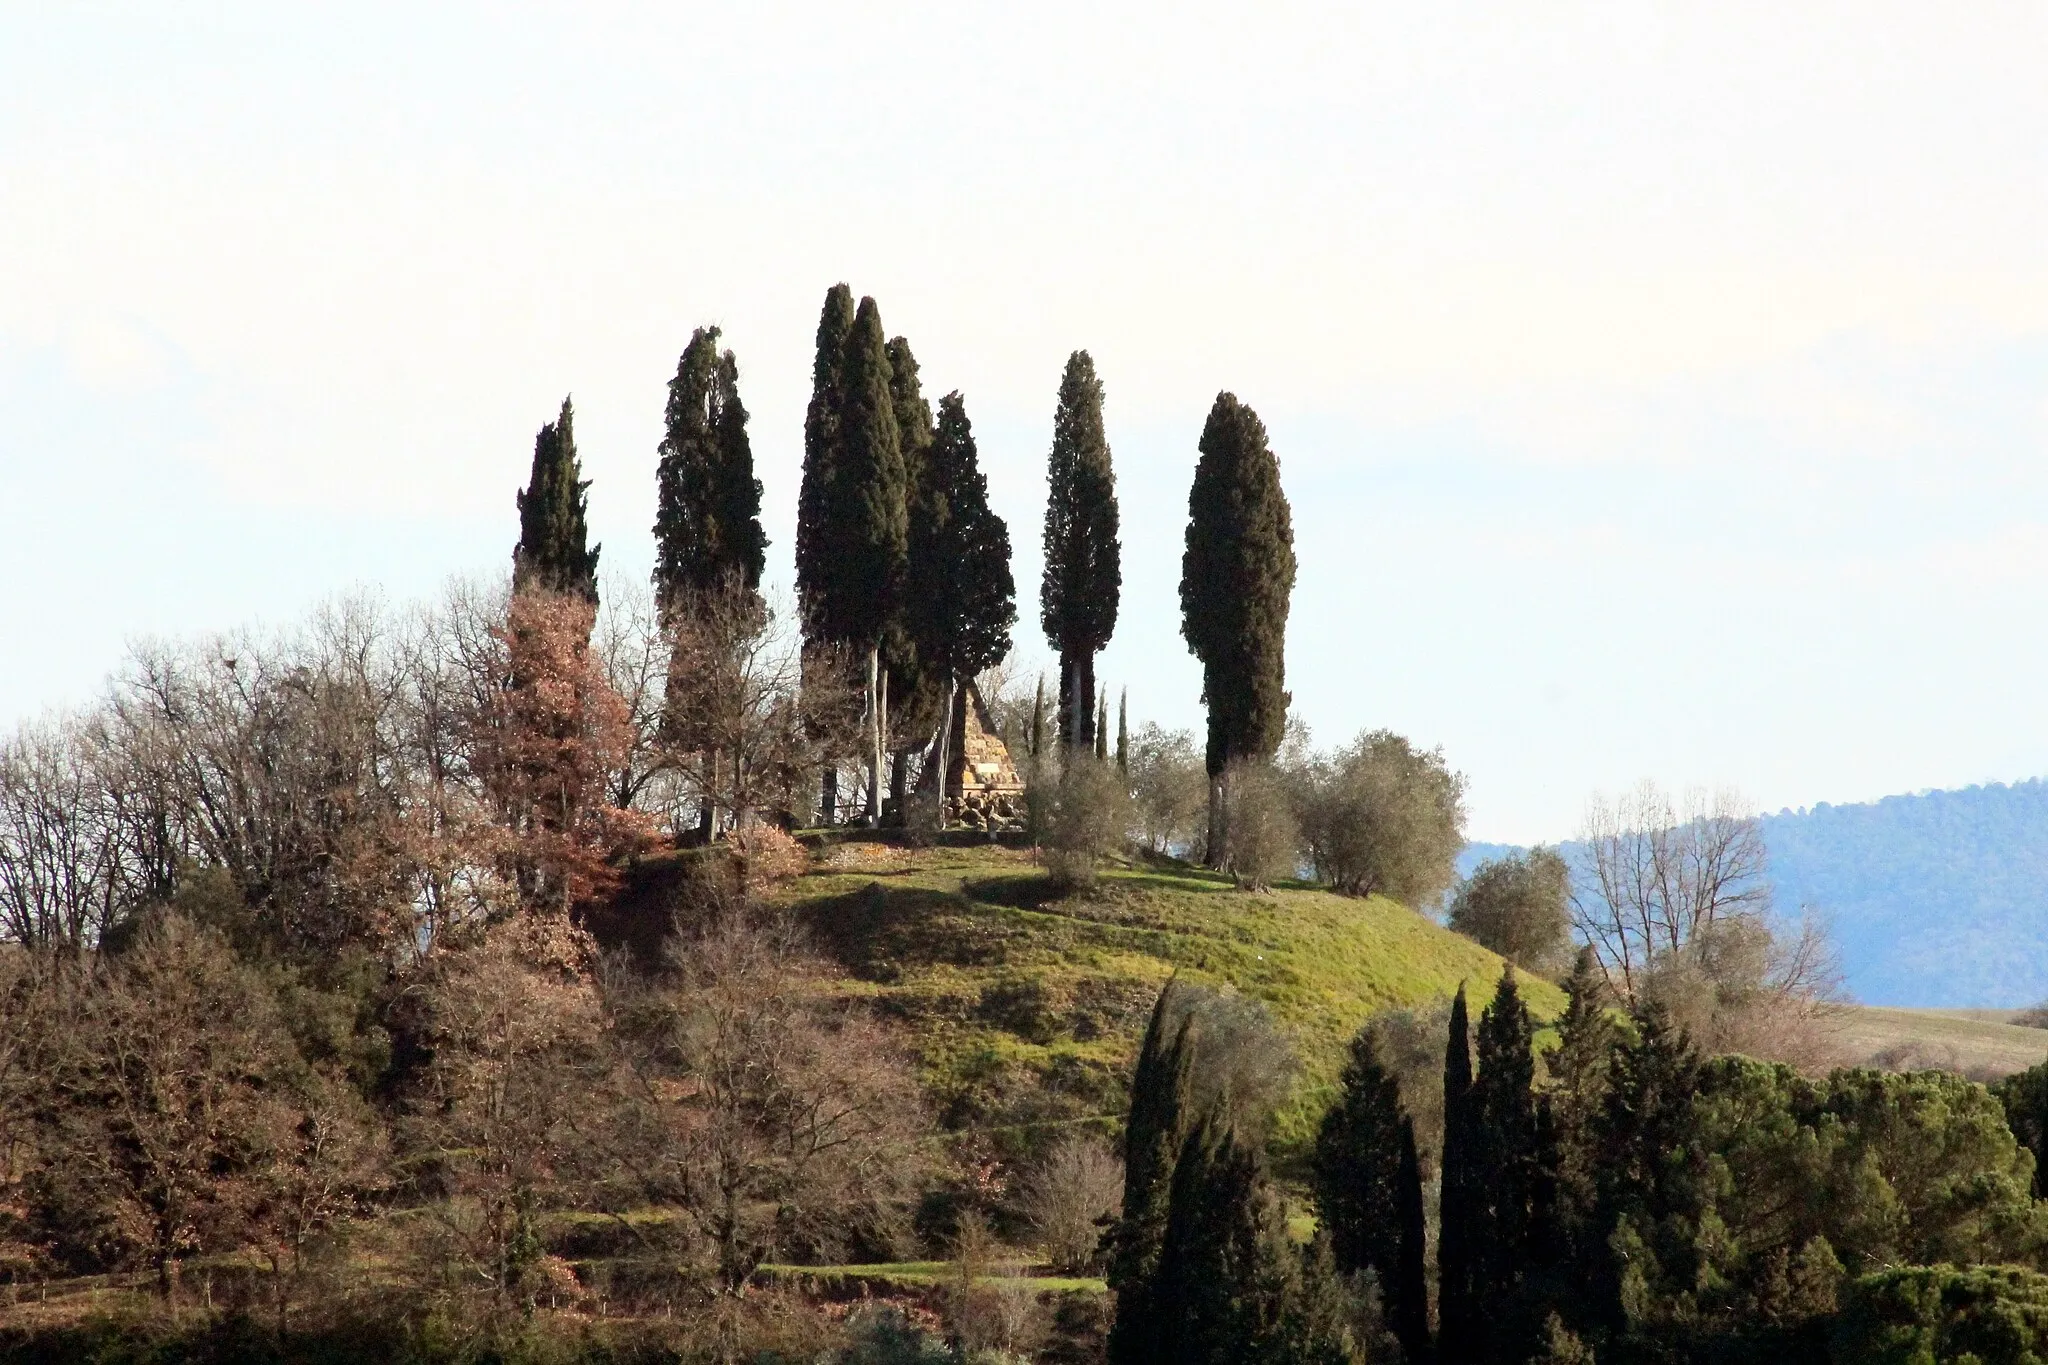 Photo showing: Piramide di Montaperti (Pyramid of Montaperti), War memorial to the battle of Montaperti, near Montaperti (Montapertaccio), Castelnuovo Berardenga, Province of Siena, Tuscany, Italy